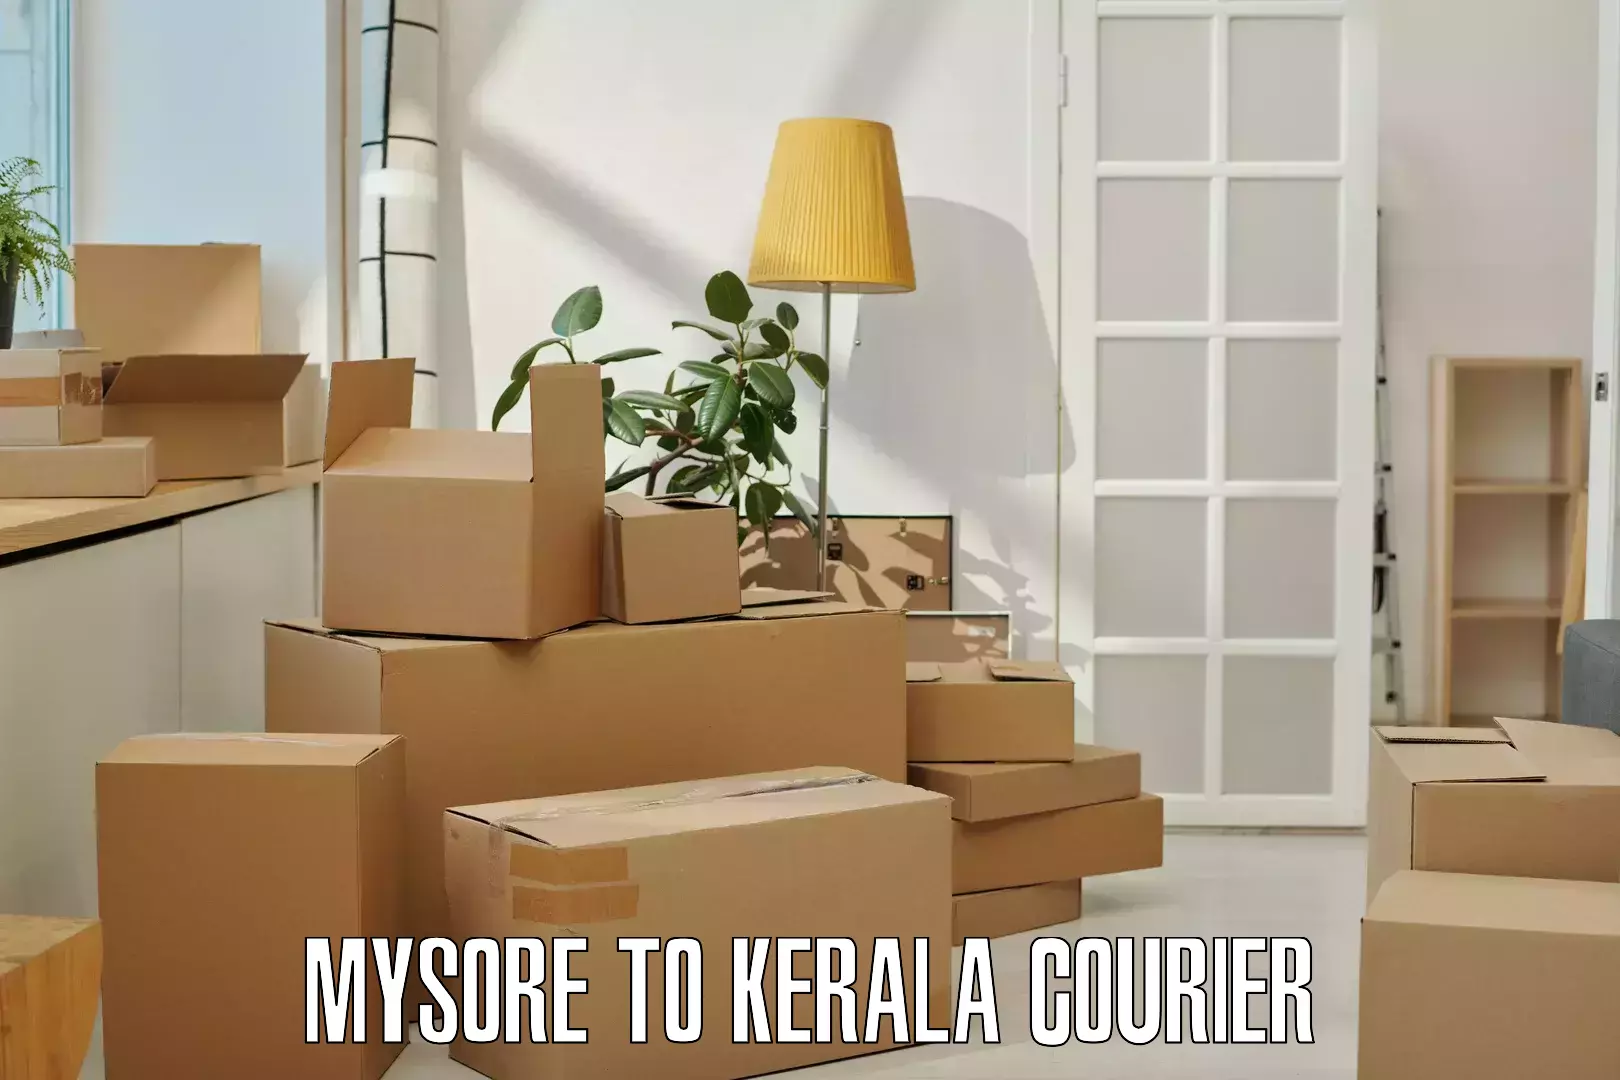 State-of-the-art courier technology Mysore to Cochin